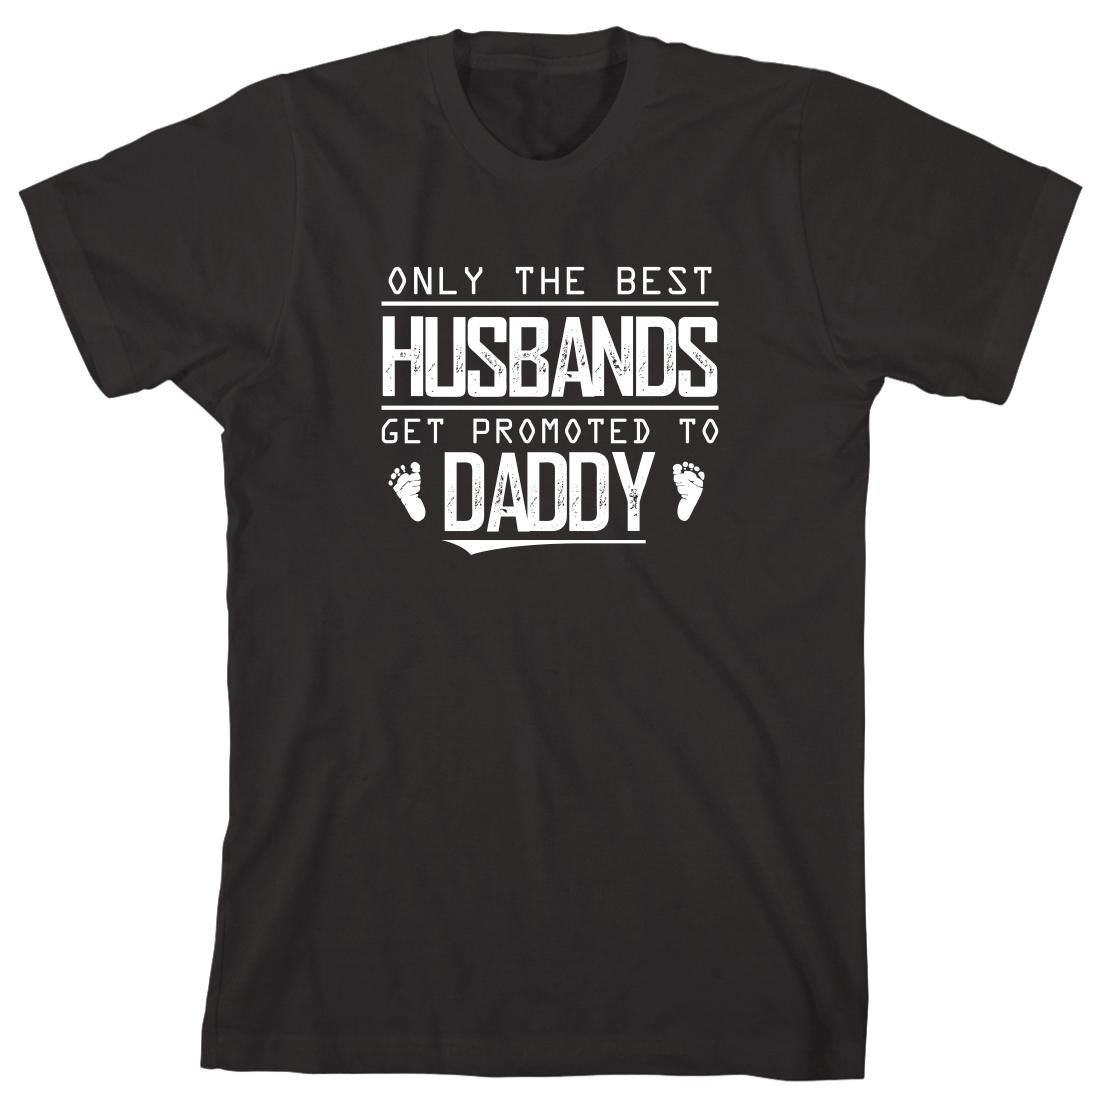 Can't forget to show the dads some love! Thanks for the great review Kim E. ★★★★★ etsy.me/2P6PcPd #etsy #clothing #newbabyarrival #babyannouncement #giftidea #shirtforhusband #bestdaddy #daddyshirt #newlypromoteddad #rookiedadshirt #dad #customshirts